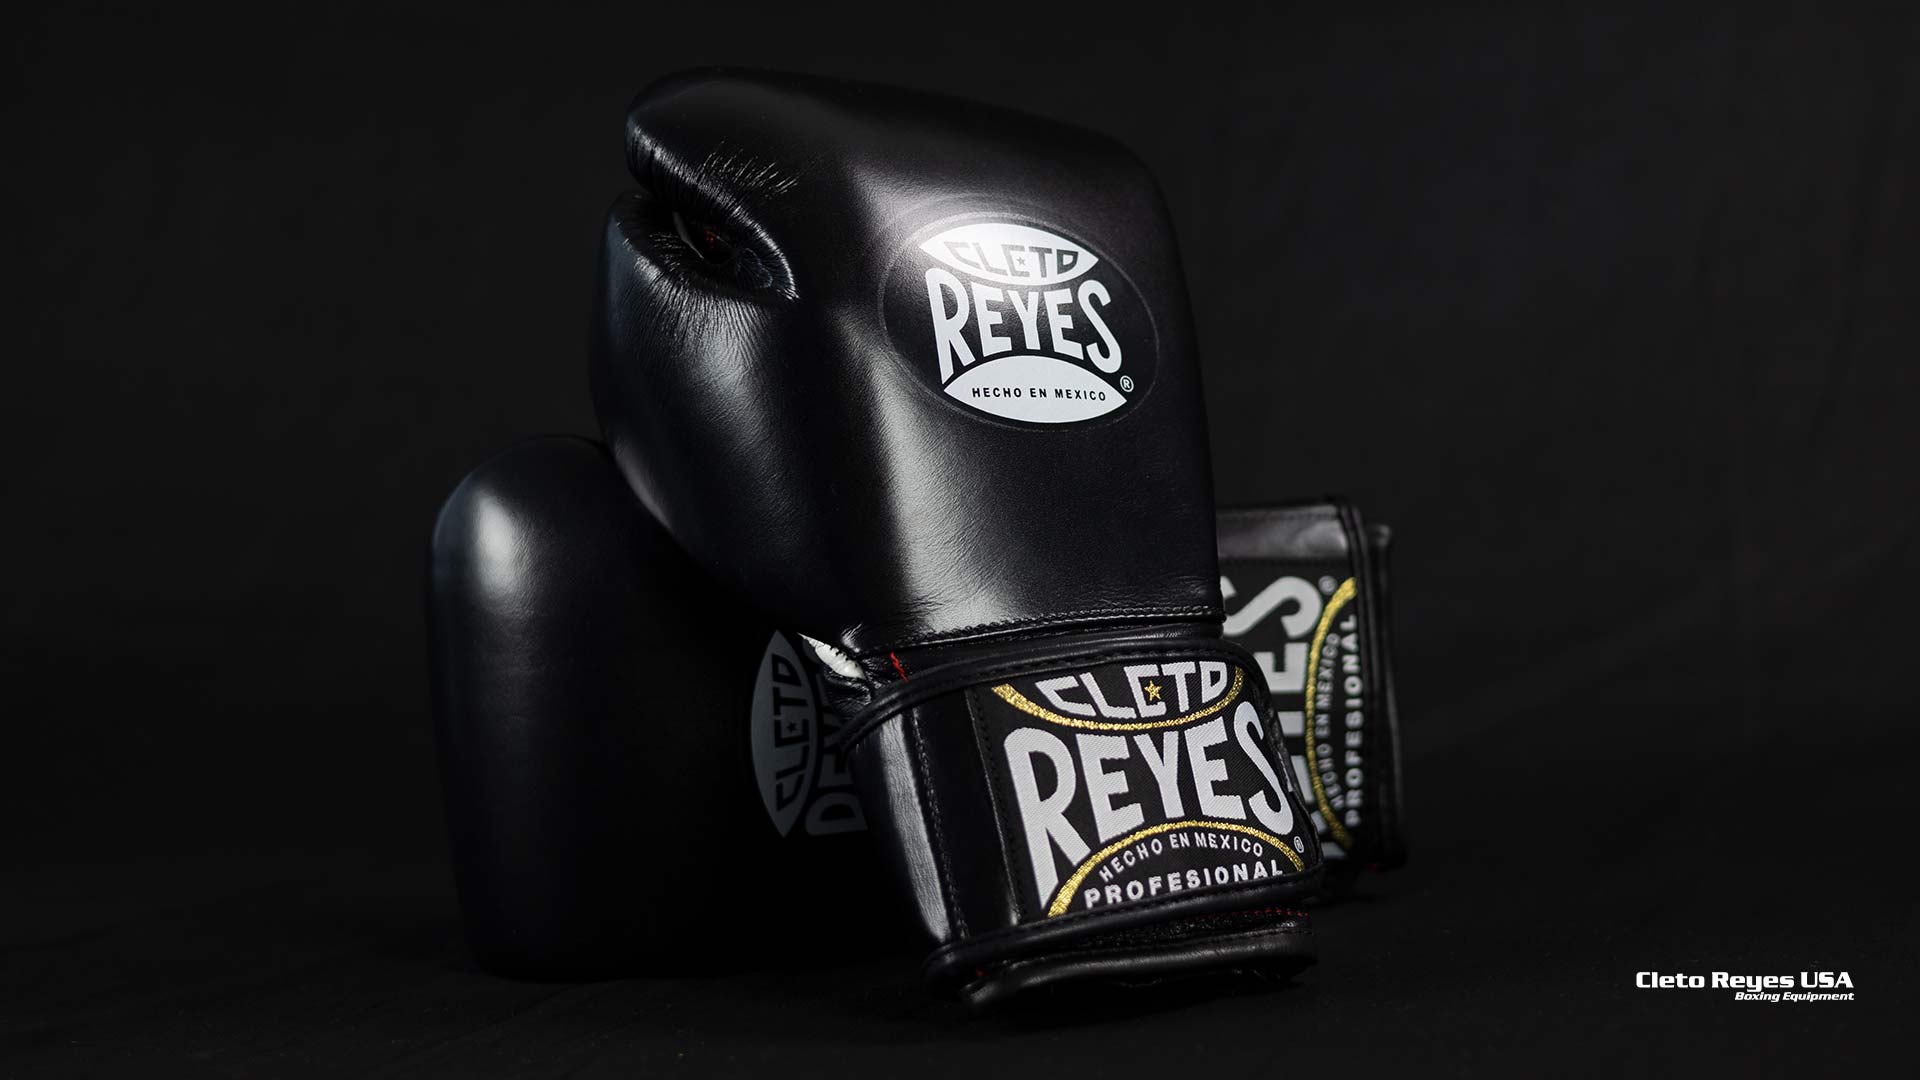 New Limited Edition Boxing Gloves